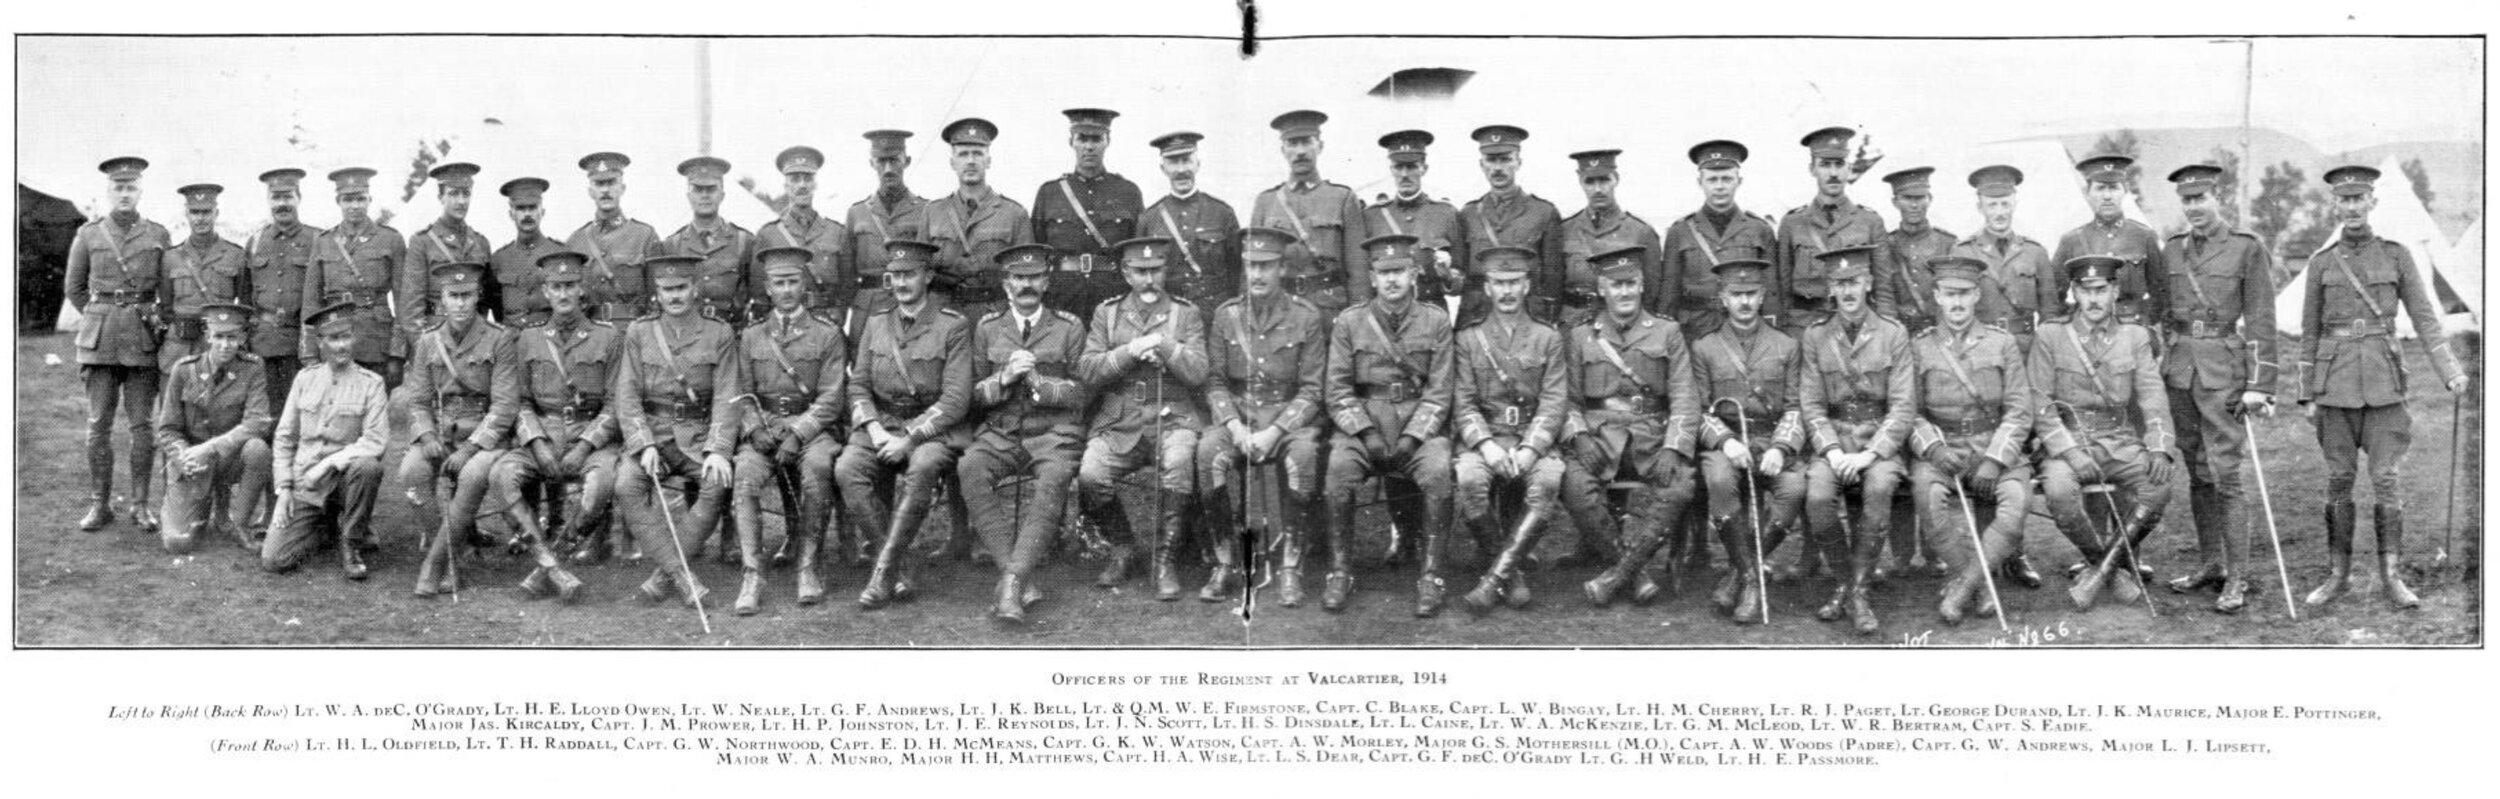 8th Battalion officers at Valcartier: Major Lipsett, the Battalion’s Commanding Officer, is seated, centre, where the page fold is; A. W. Woods is two to the left of him.